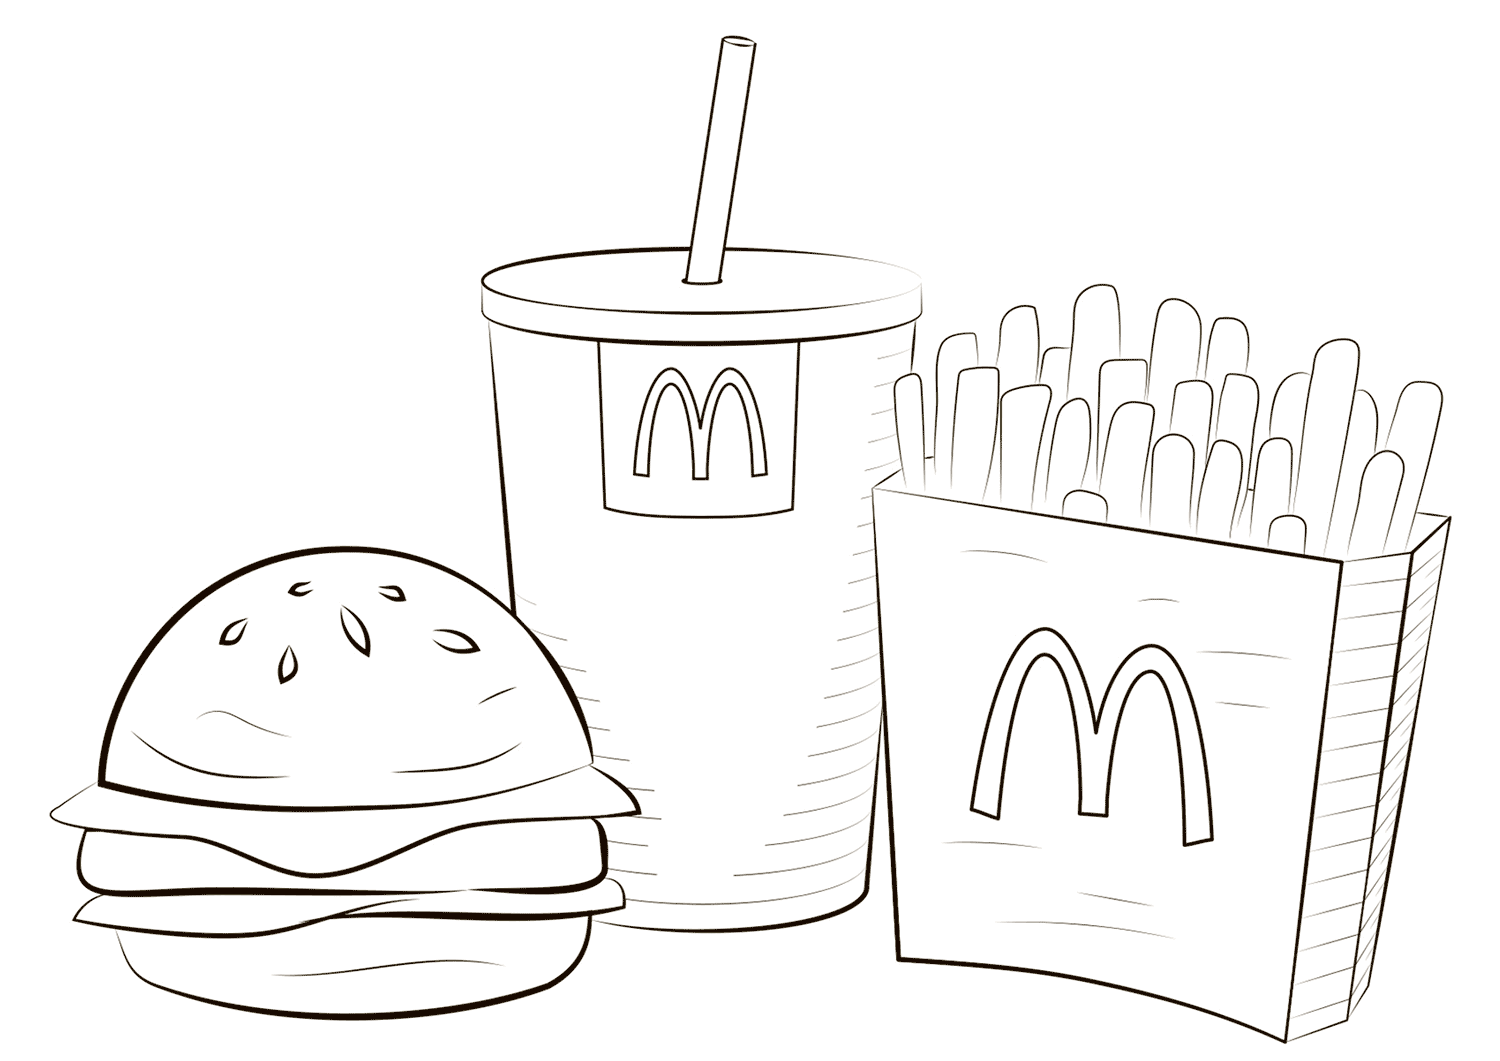 McDonald Food Coloring Page - Free Printable Coloring Pages for Kids